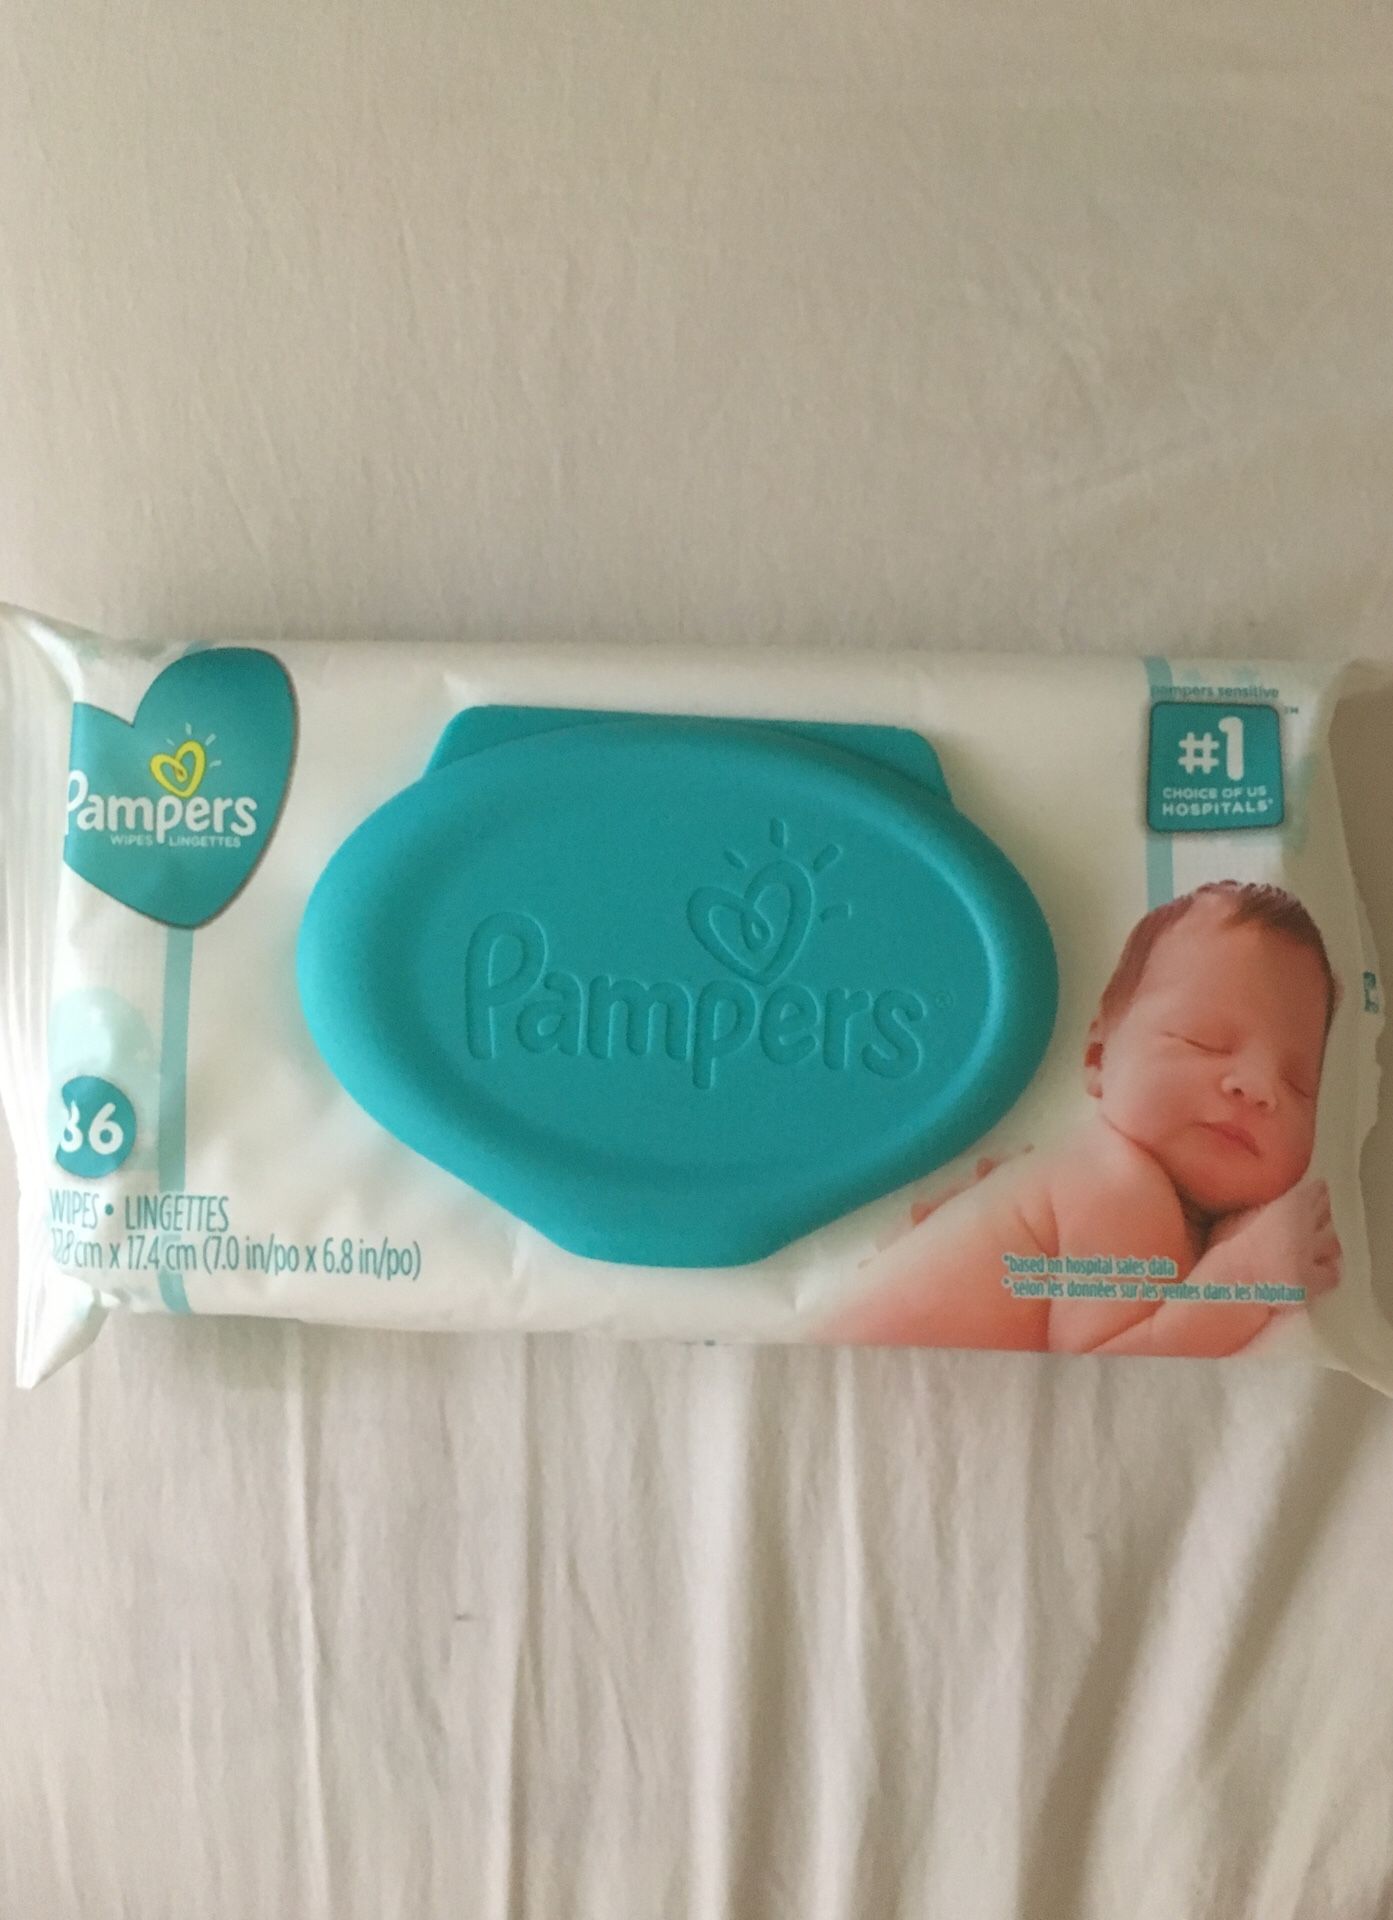 Pampers wipes sealed-one pack only